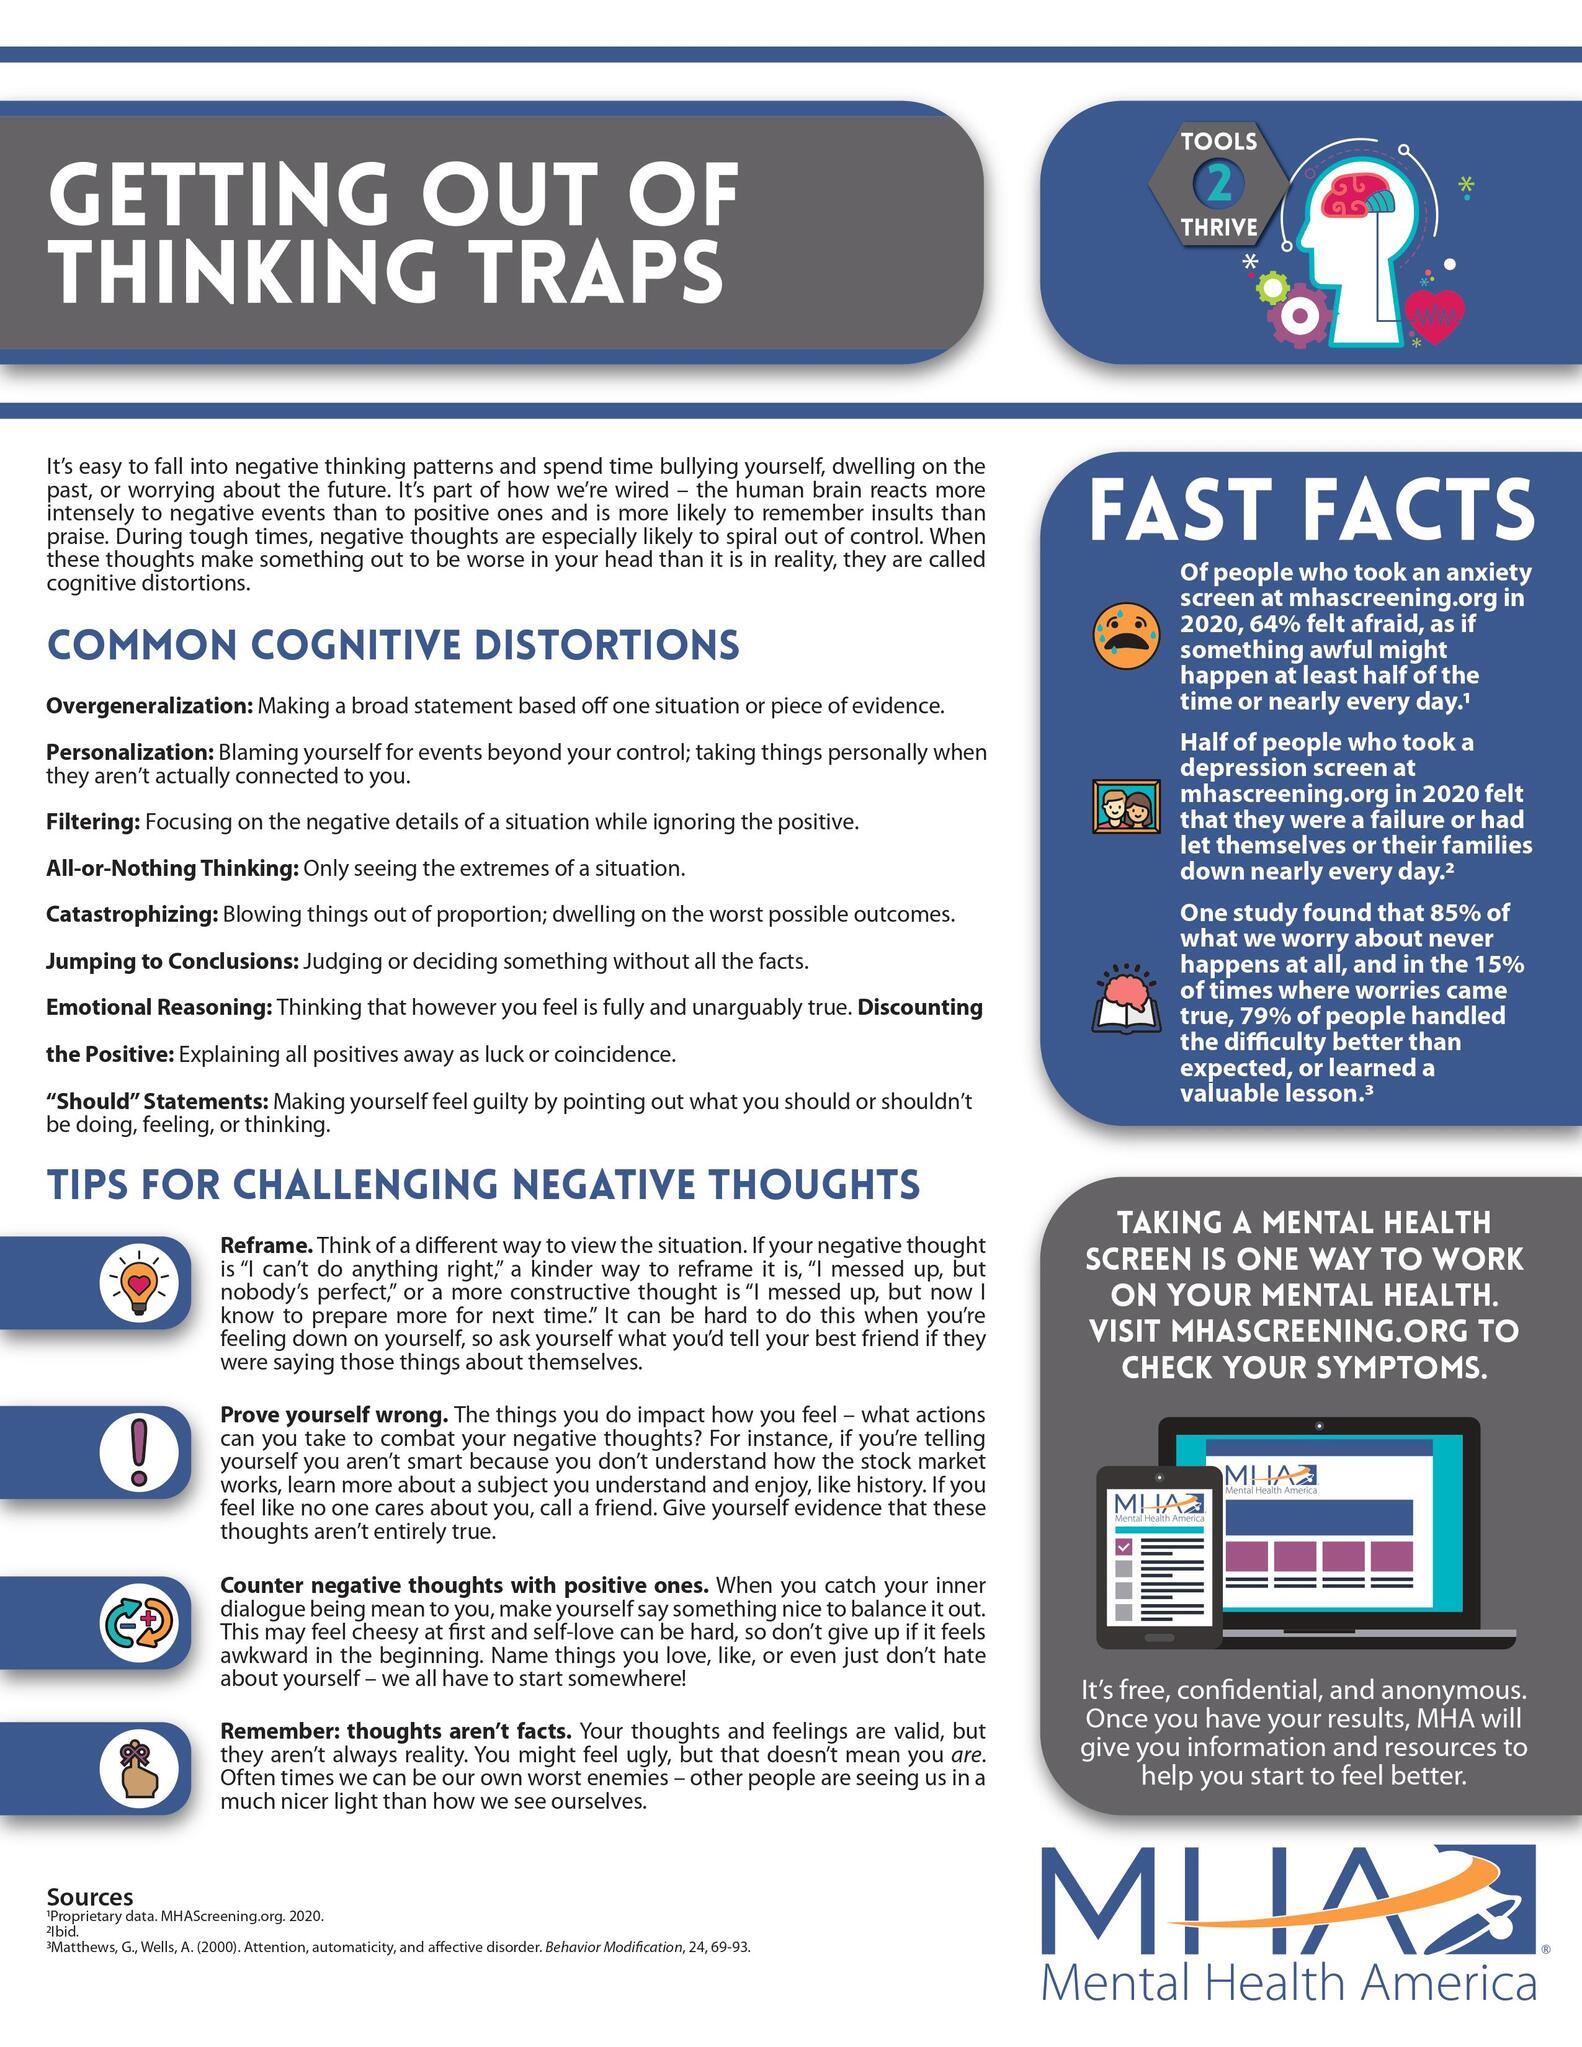 Fact Sheet - Getting out of thinking traps